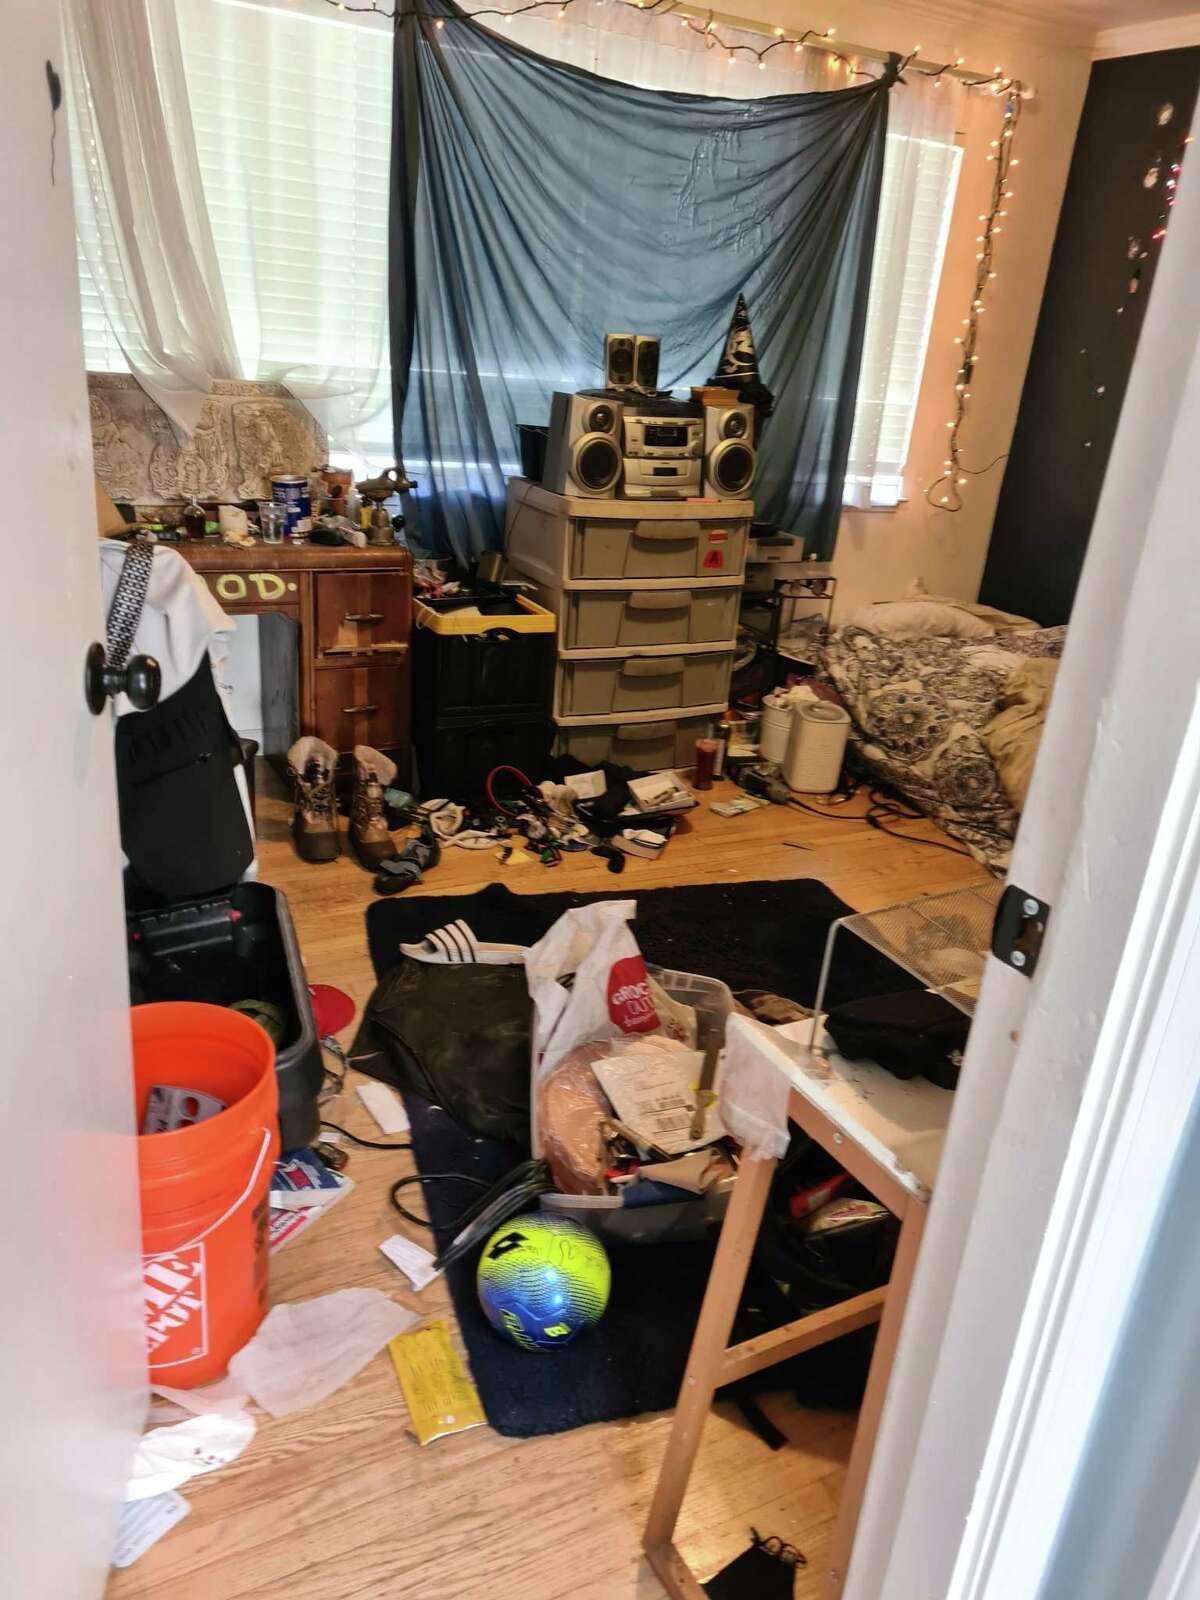 Squatters left a mess in a Bernal Heights house. Hauling away their belongings cost the homeowners $3,000.